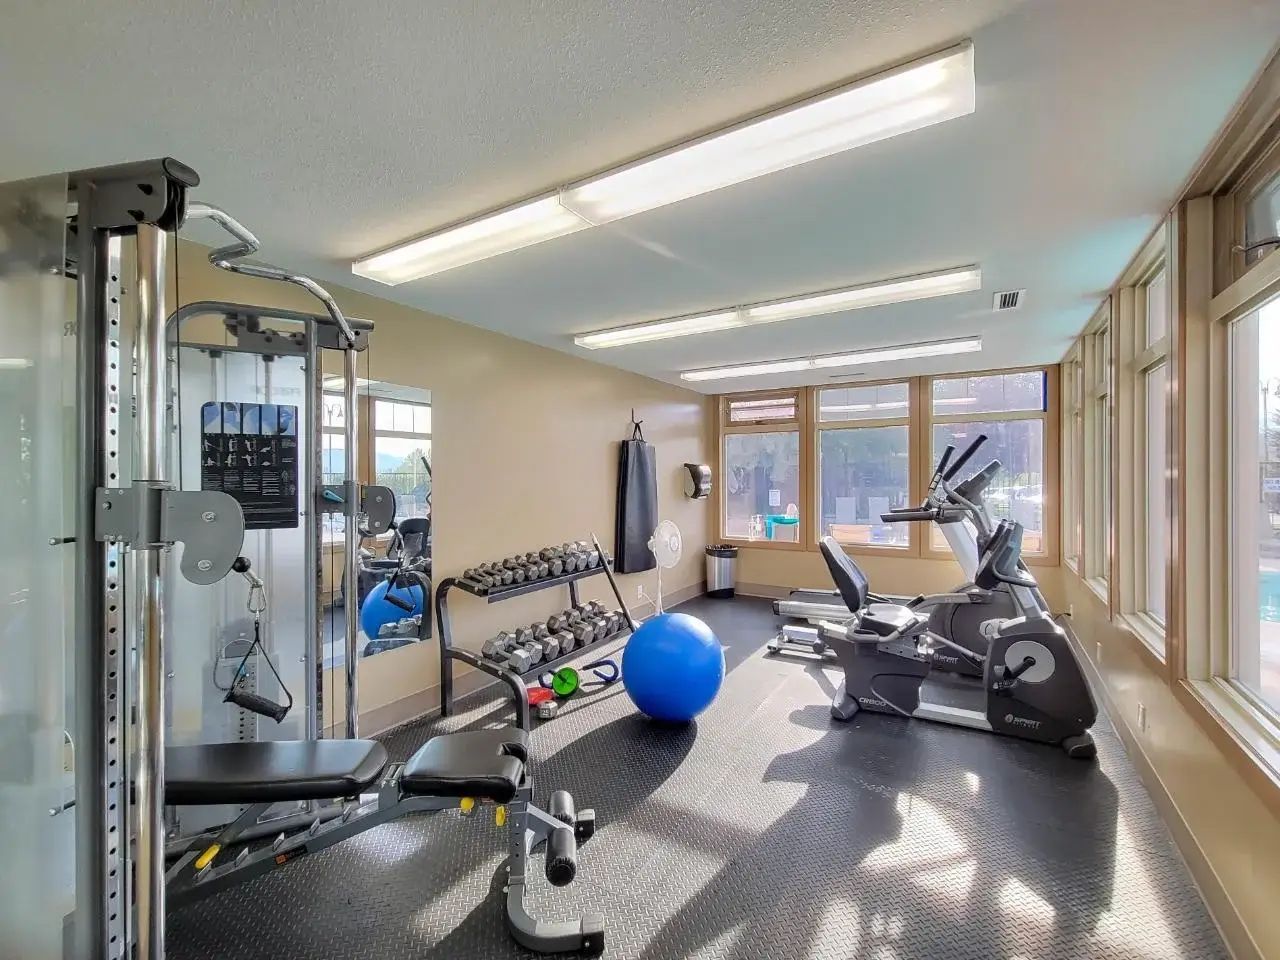 Full gym at the Lake Windermere Pointe Condos in Invermere, BC managed by Aisling Baile Property Management